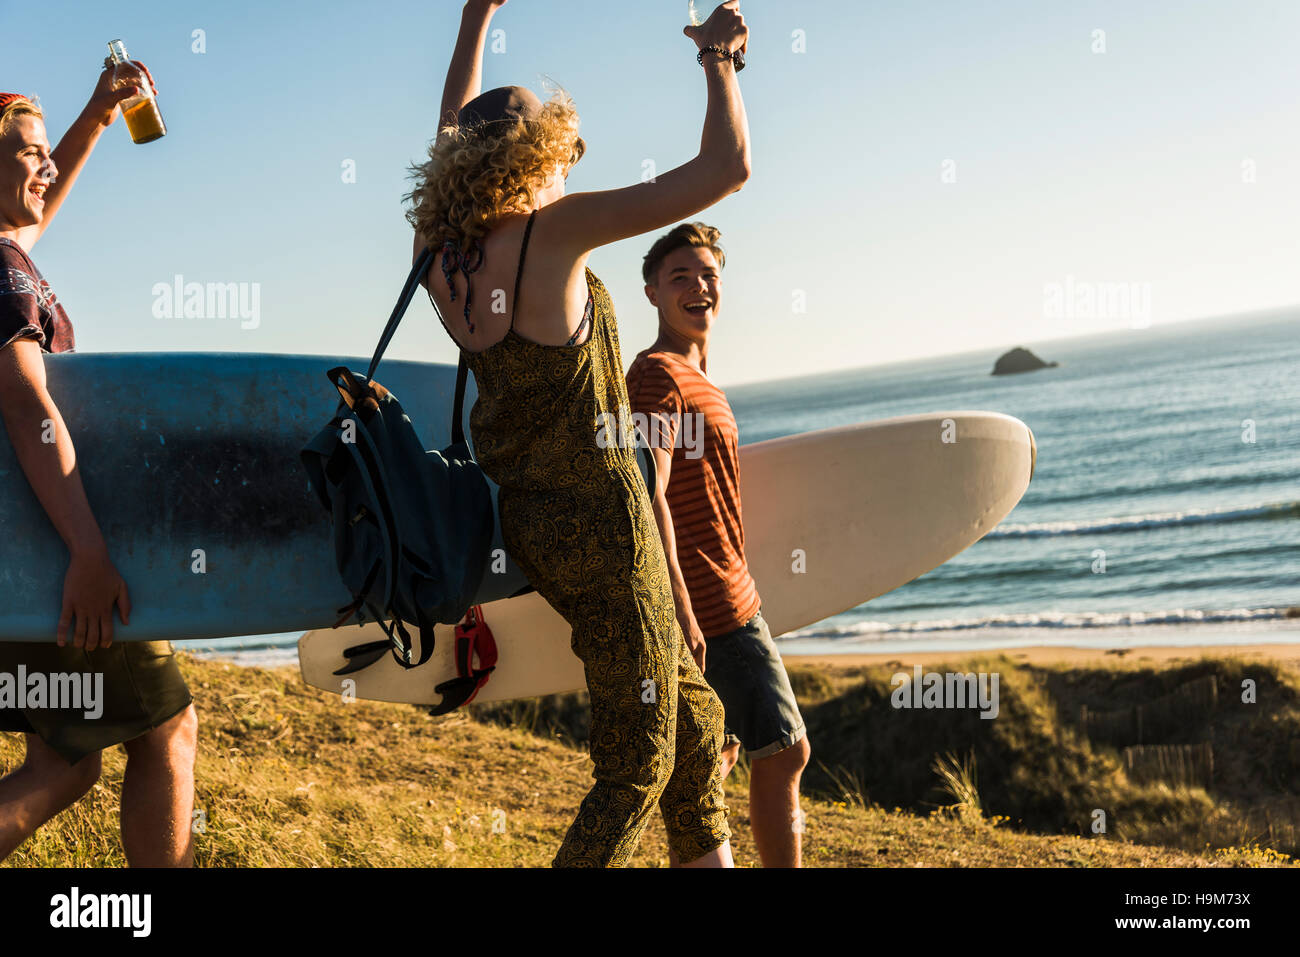 Three friends with surfboards having fun at seaside Stock Photo